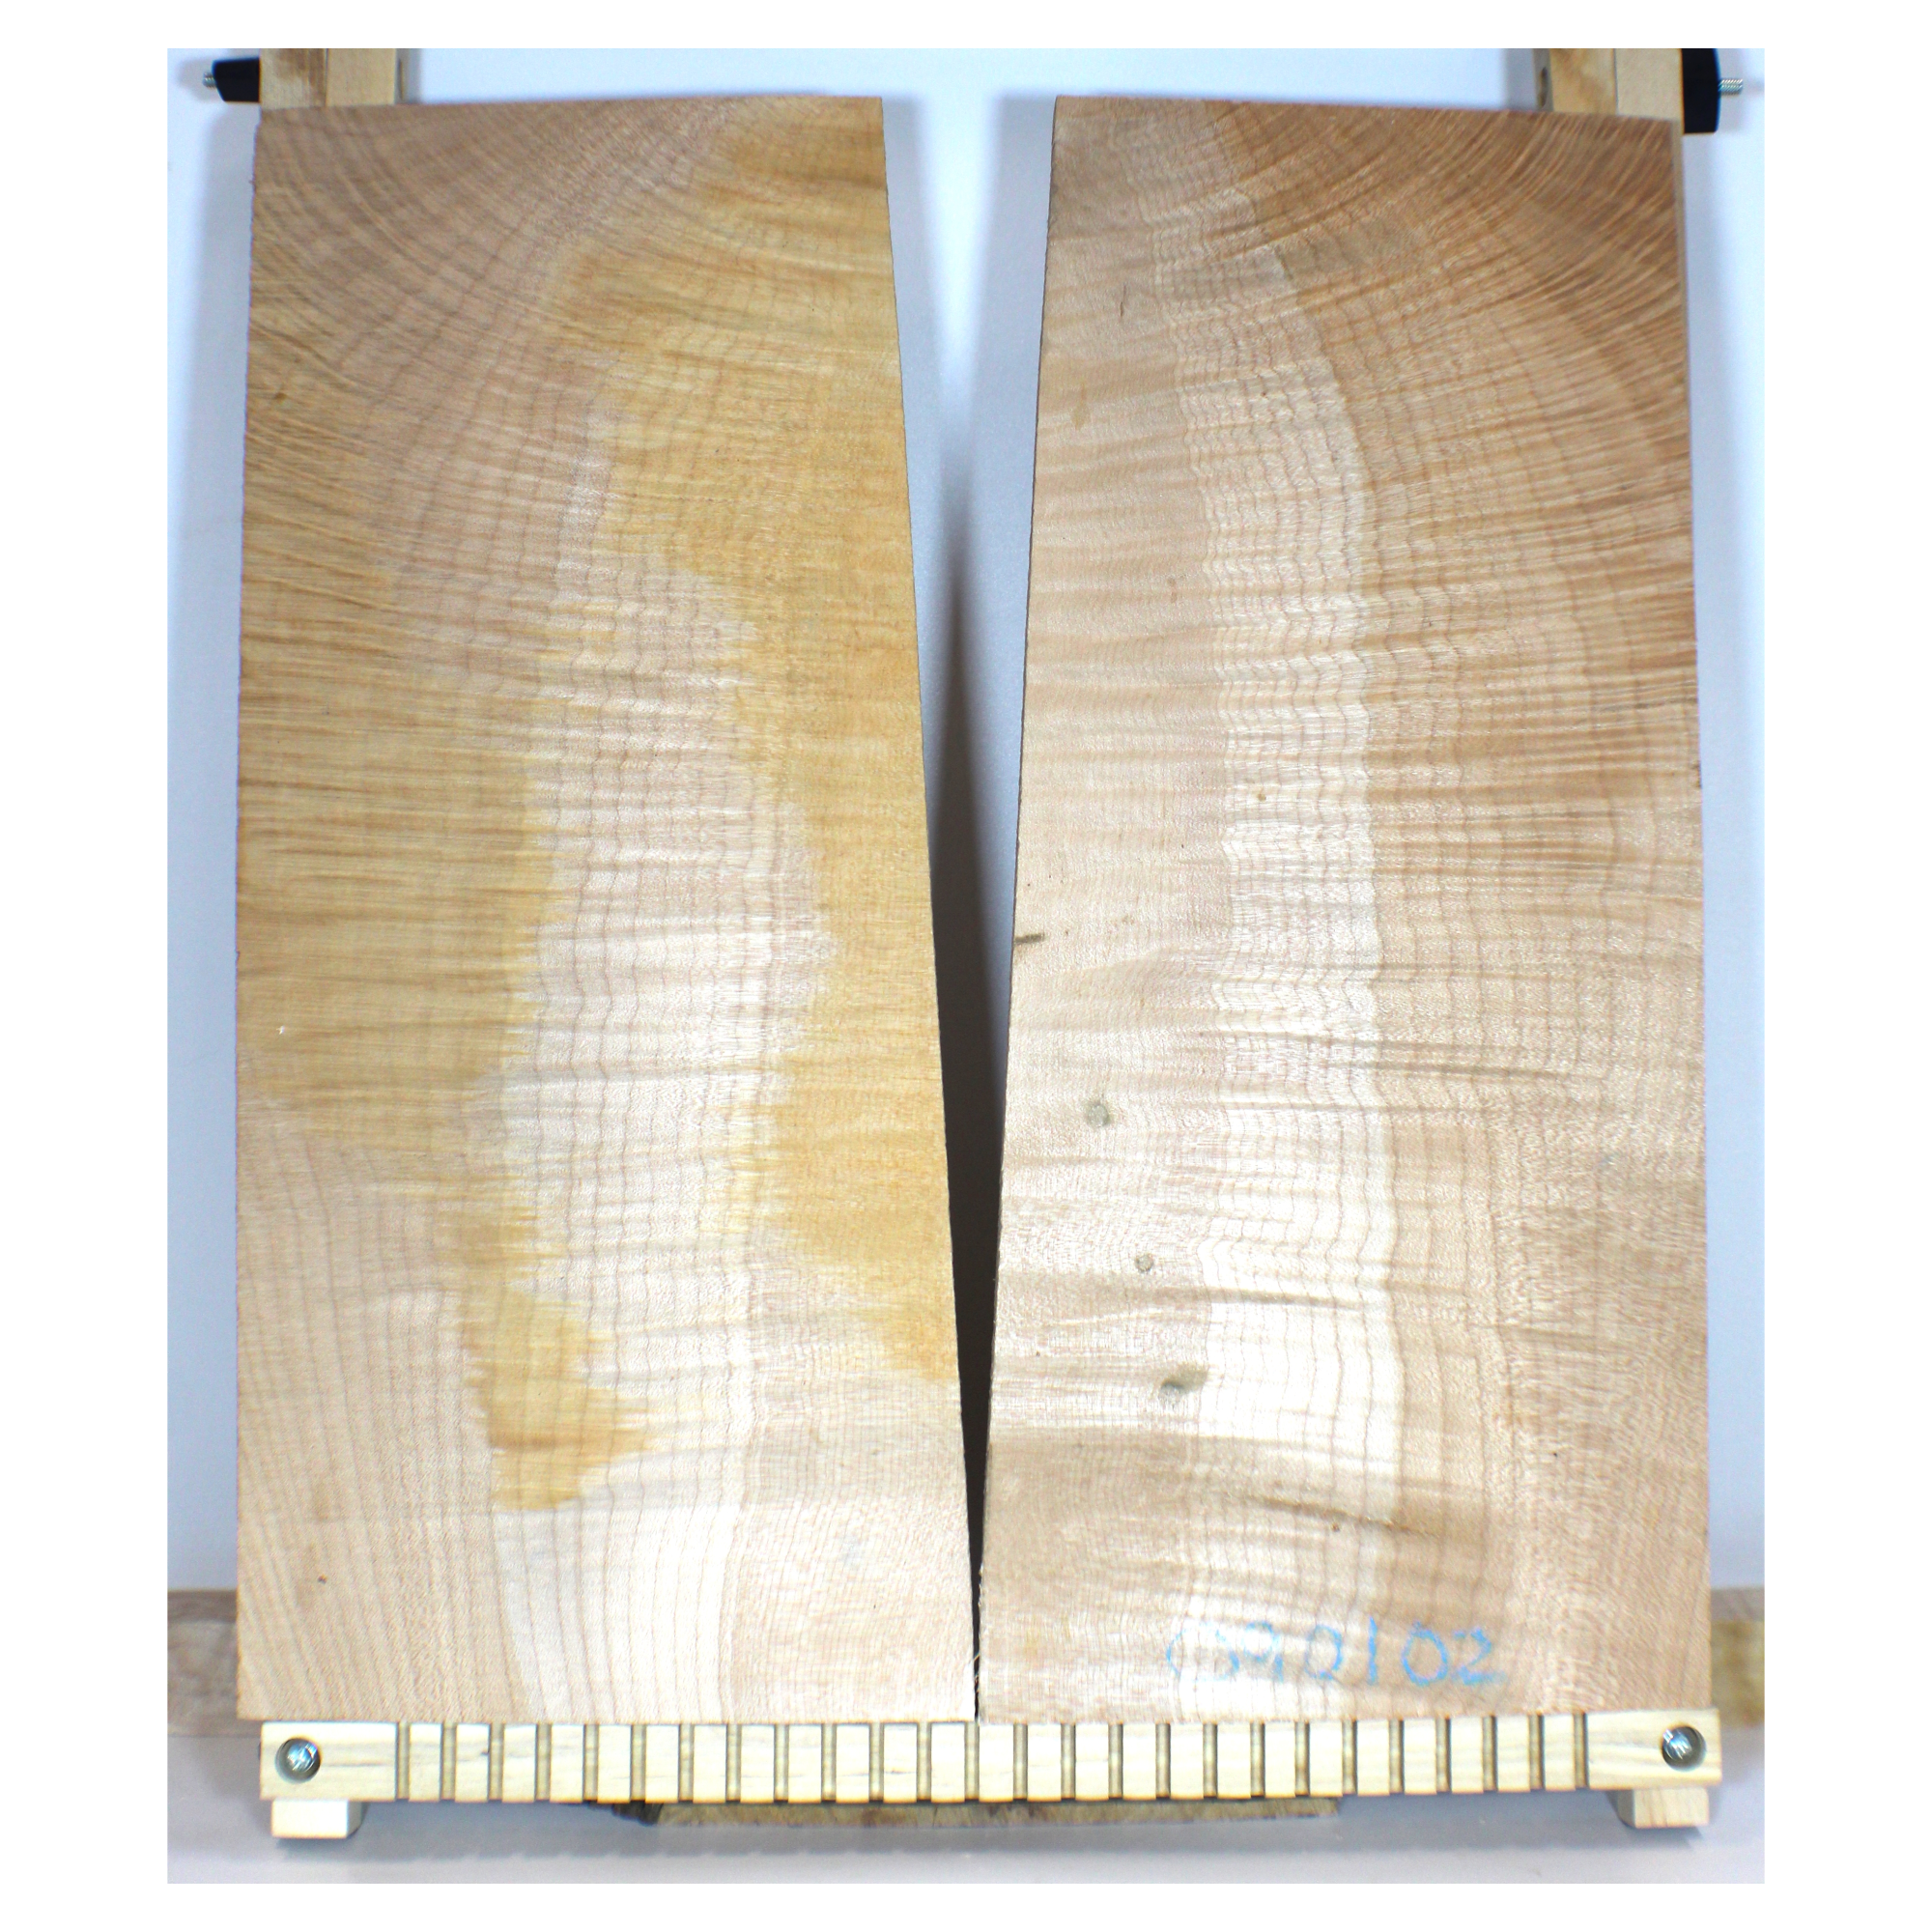 Gorgeous 5A figured flame maple book-matched set with two-tone color. Dimensions: Thickness (each piece): .75, Width: 8